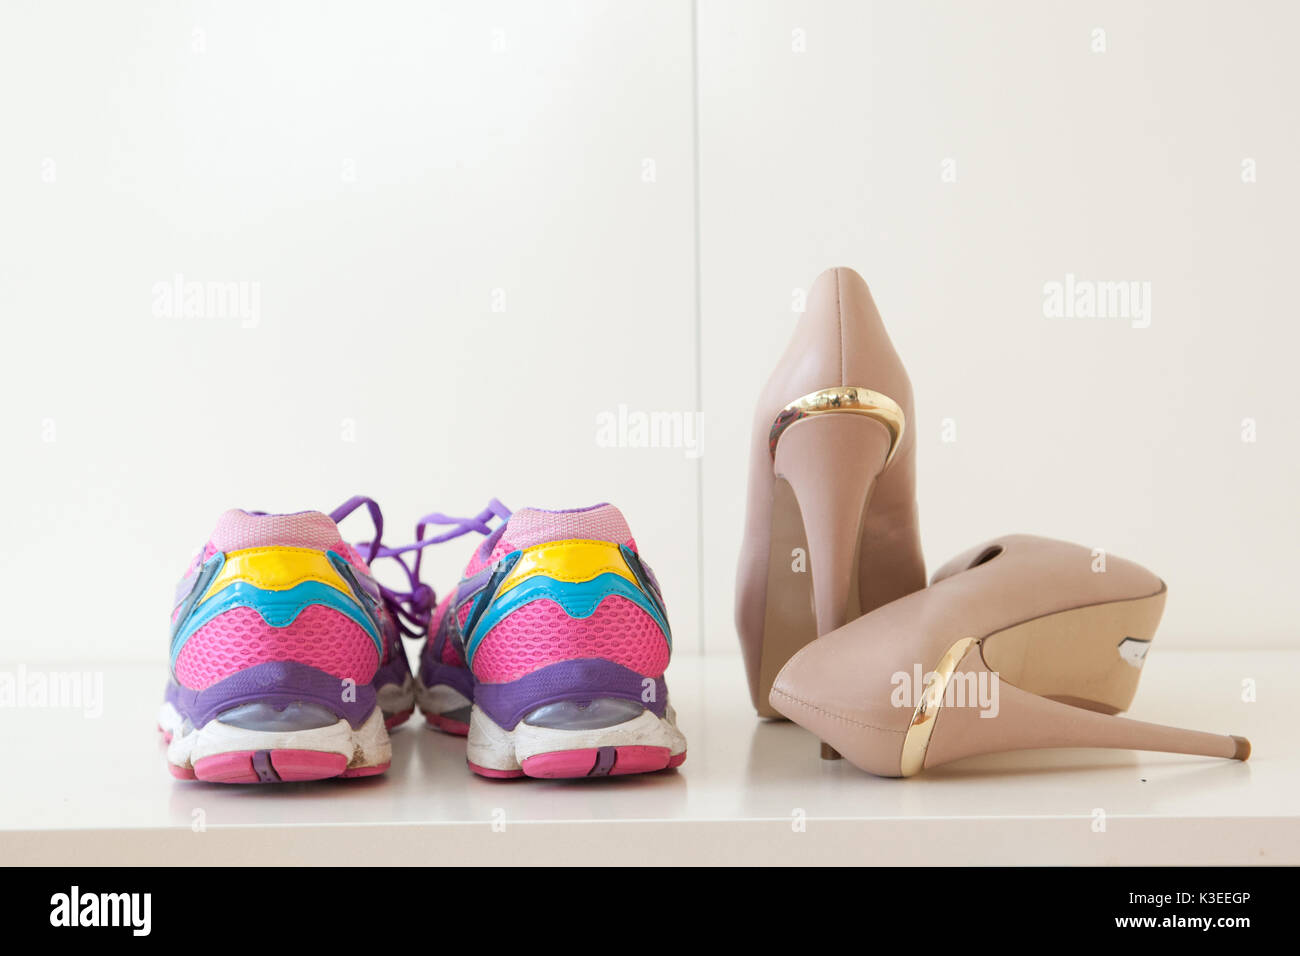 A pair of colorful sports shoes next to high heel stilettos. Stock Photo